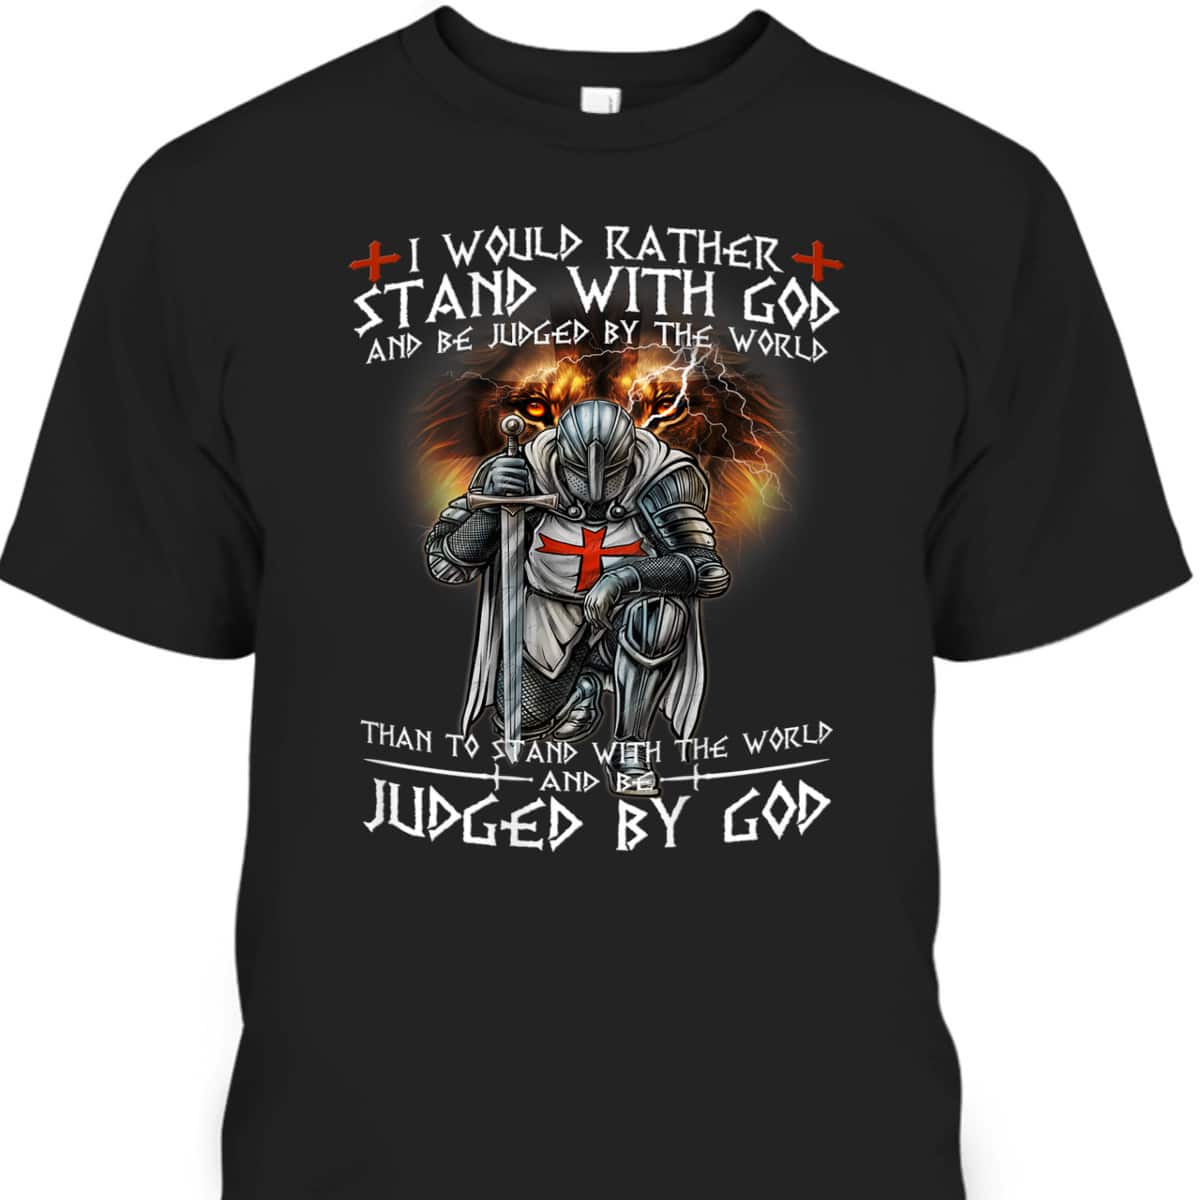 Kneeling Knight Templar Armor Of God T-Shirt I Would Rather Stand With God